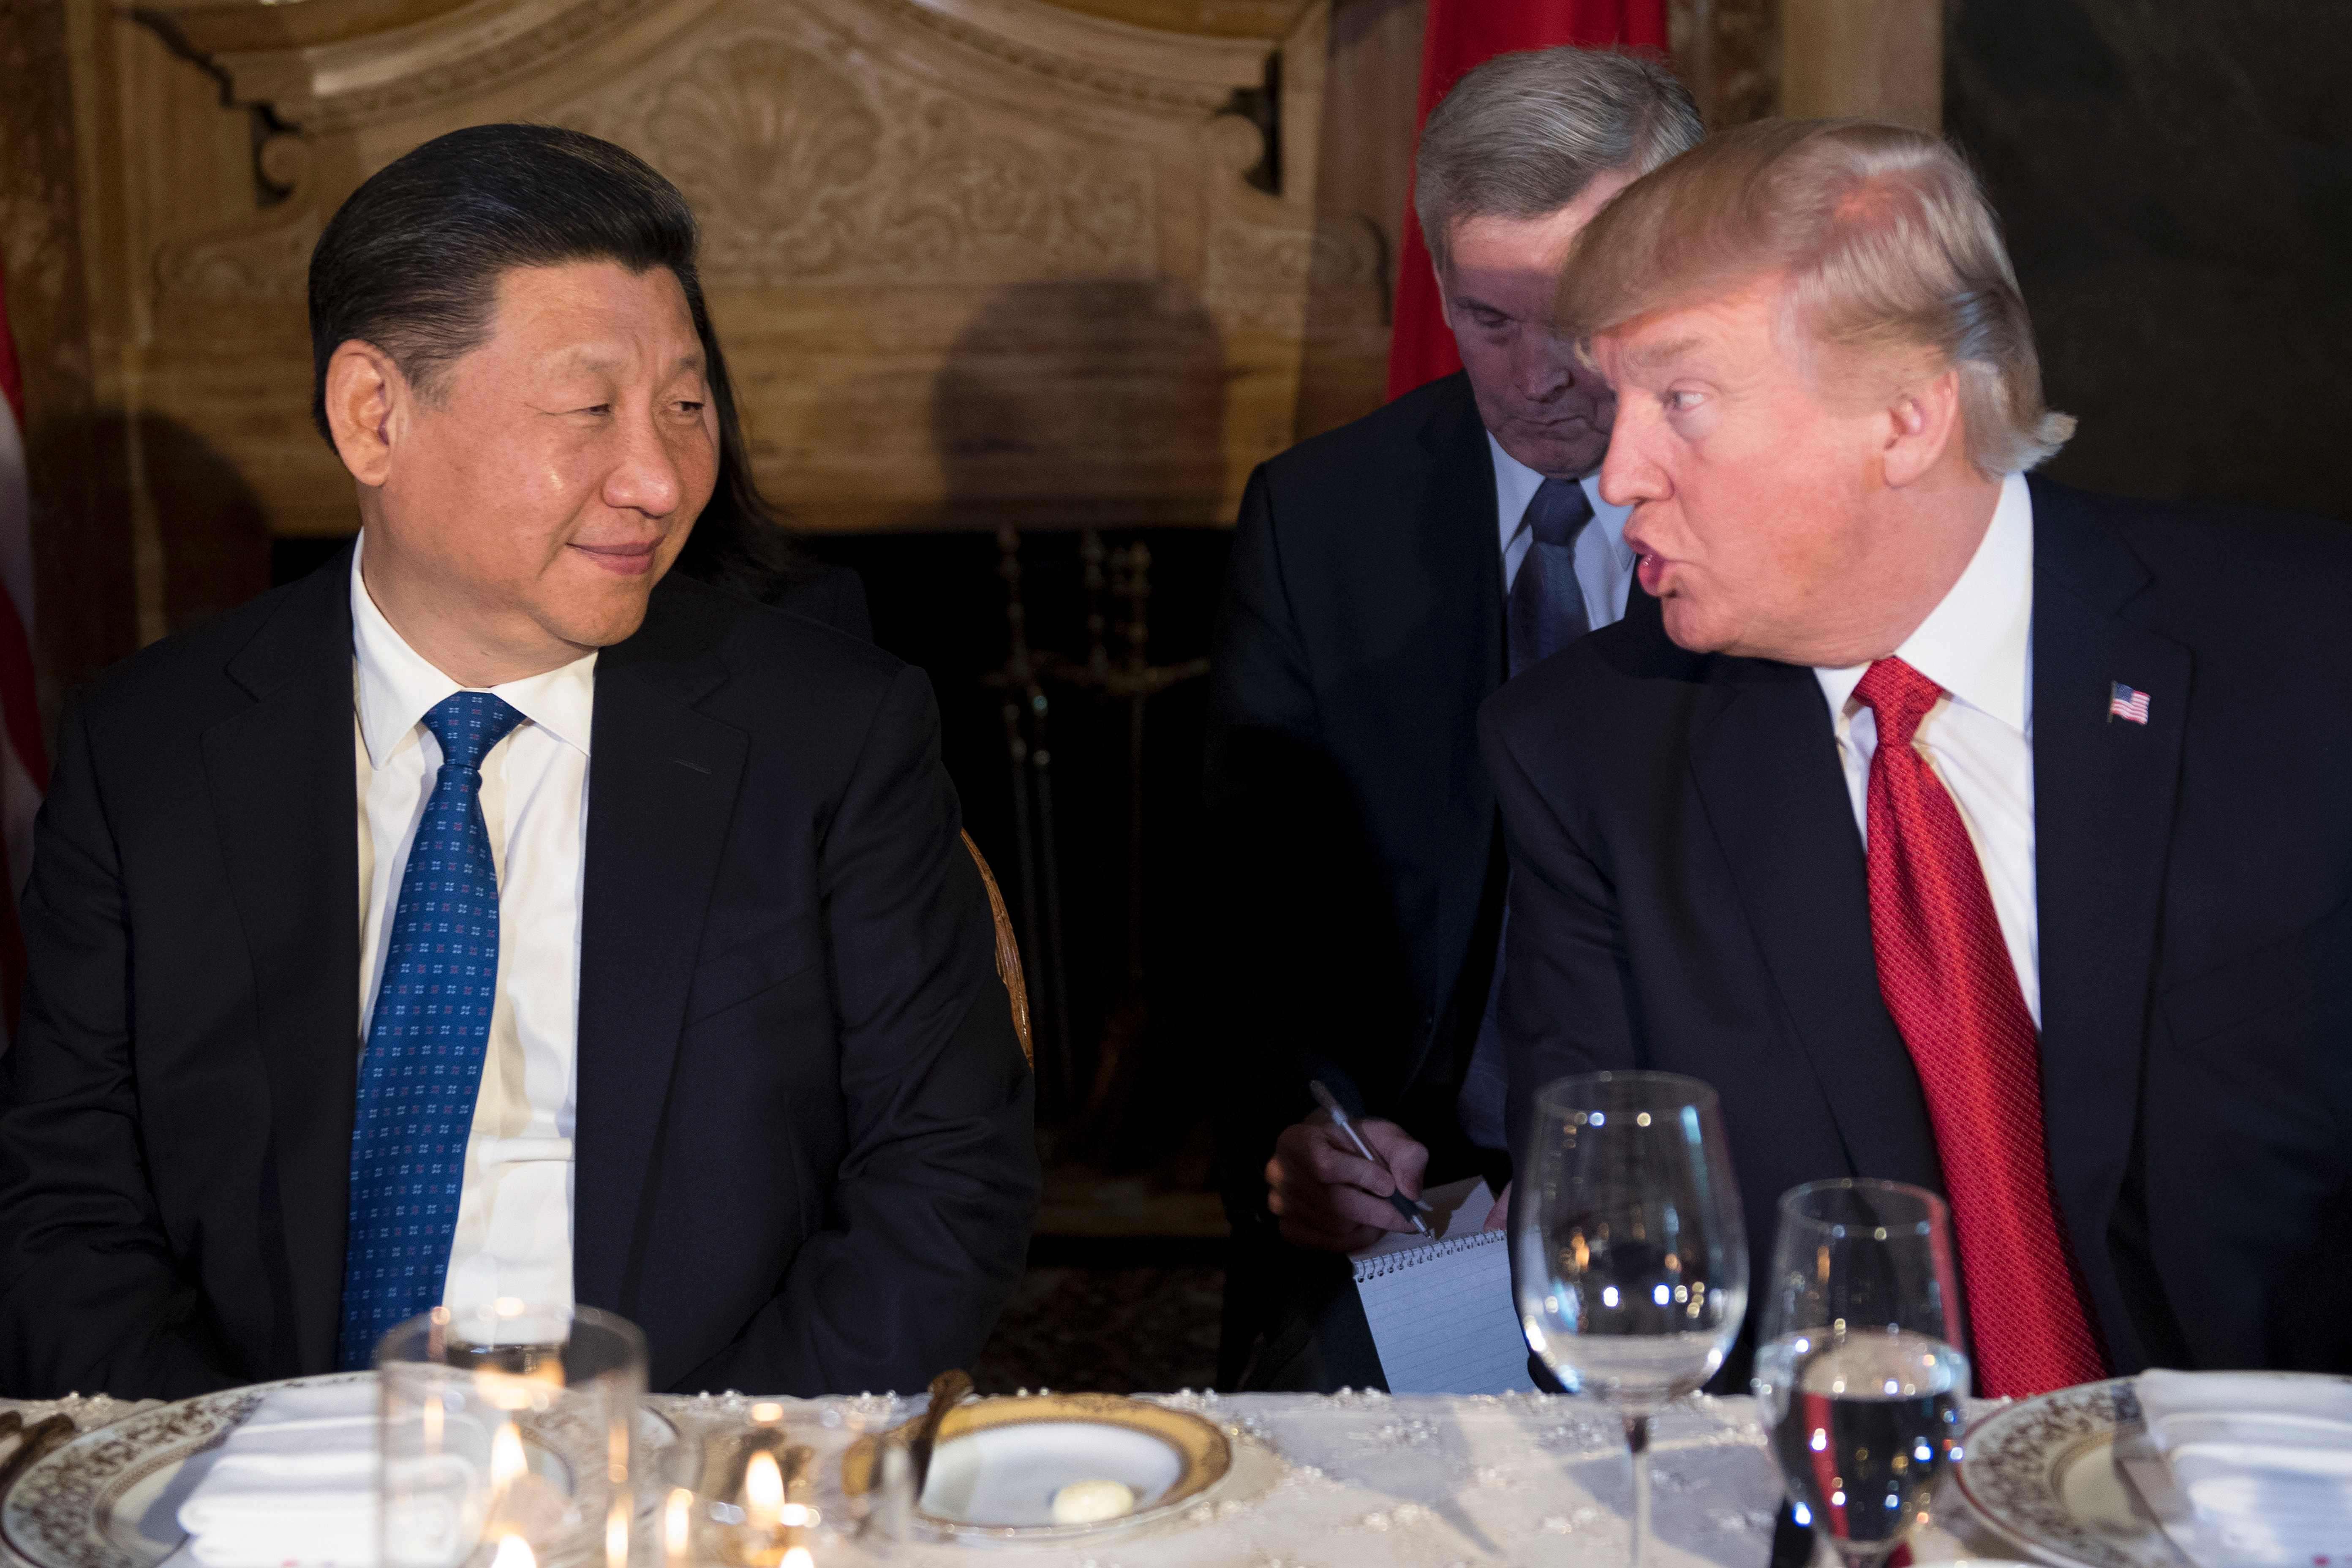 US President Donald Trump informed Chinese President Xi Jinping of US missile strikes on Syria as they were having dessert at the Mar-a-Lago estate. Photo: AFP